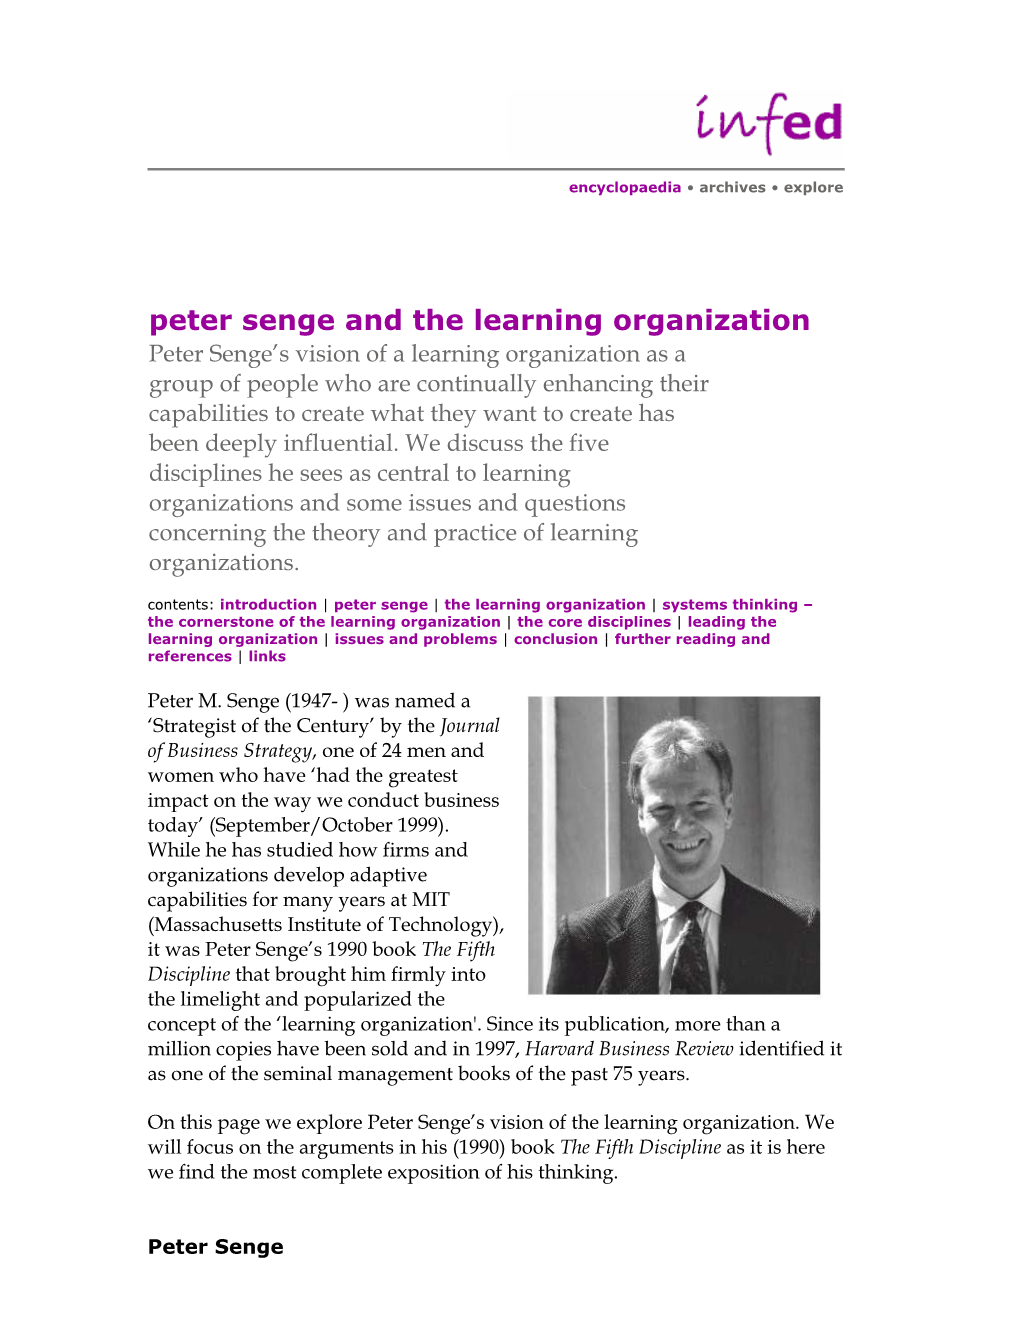 Peter Senge and the Learning Organization